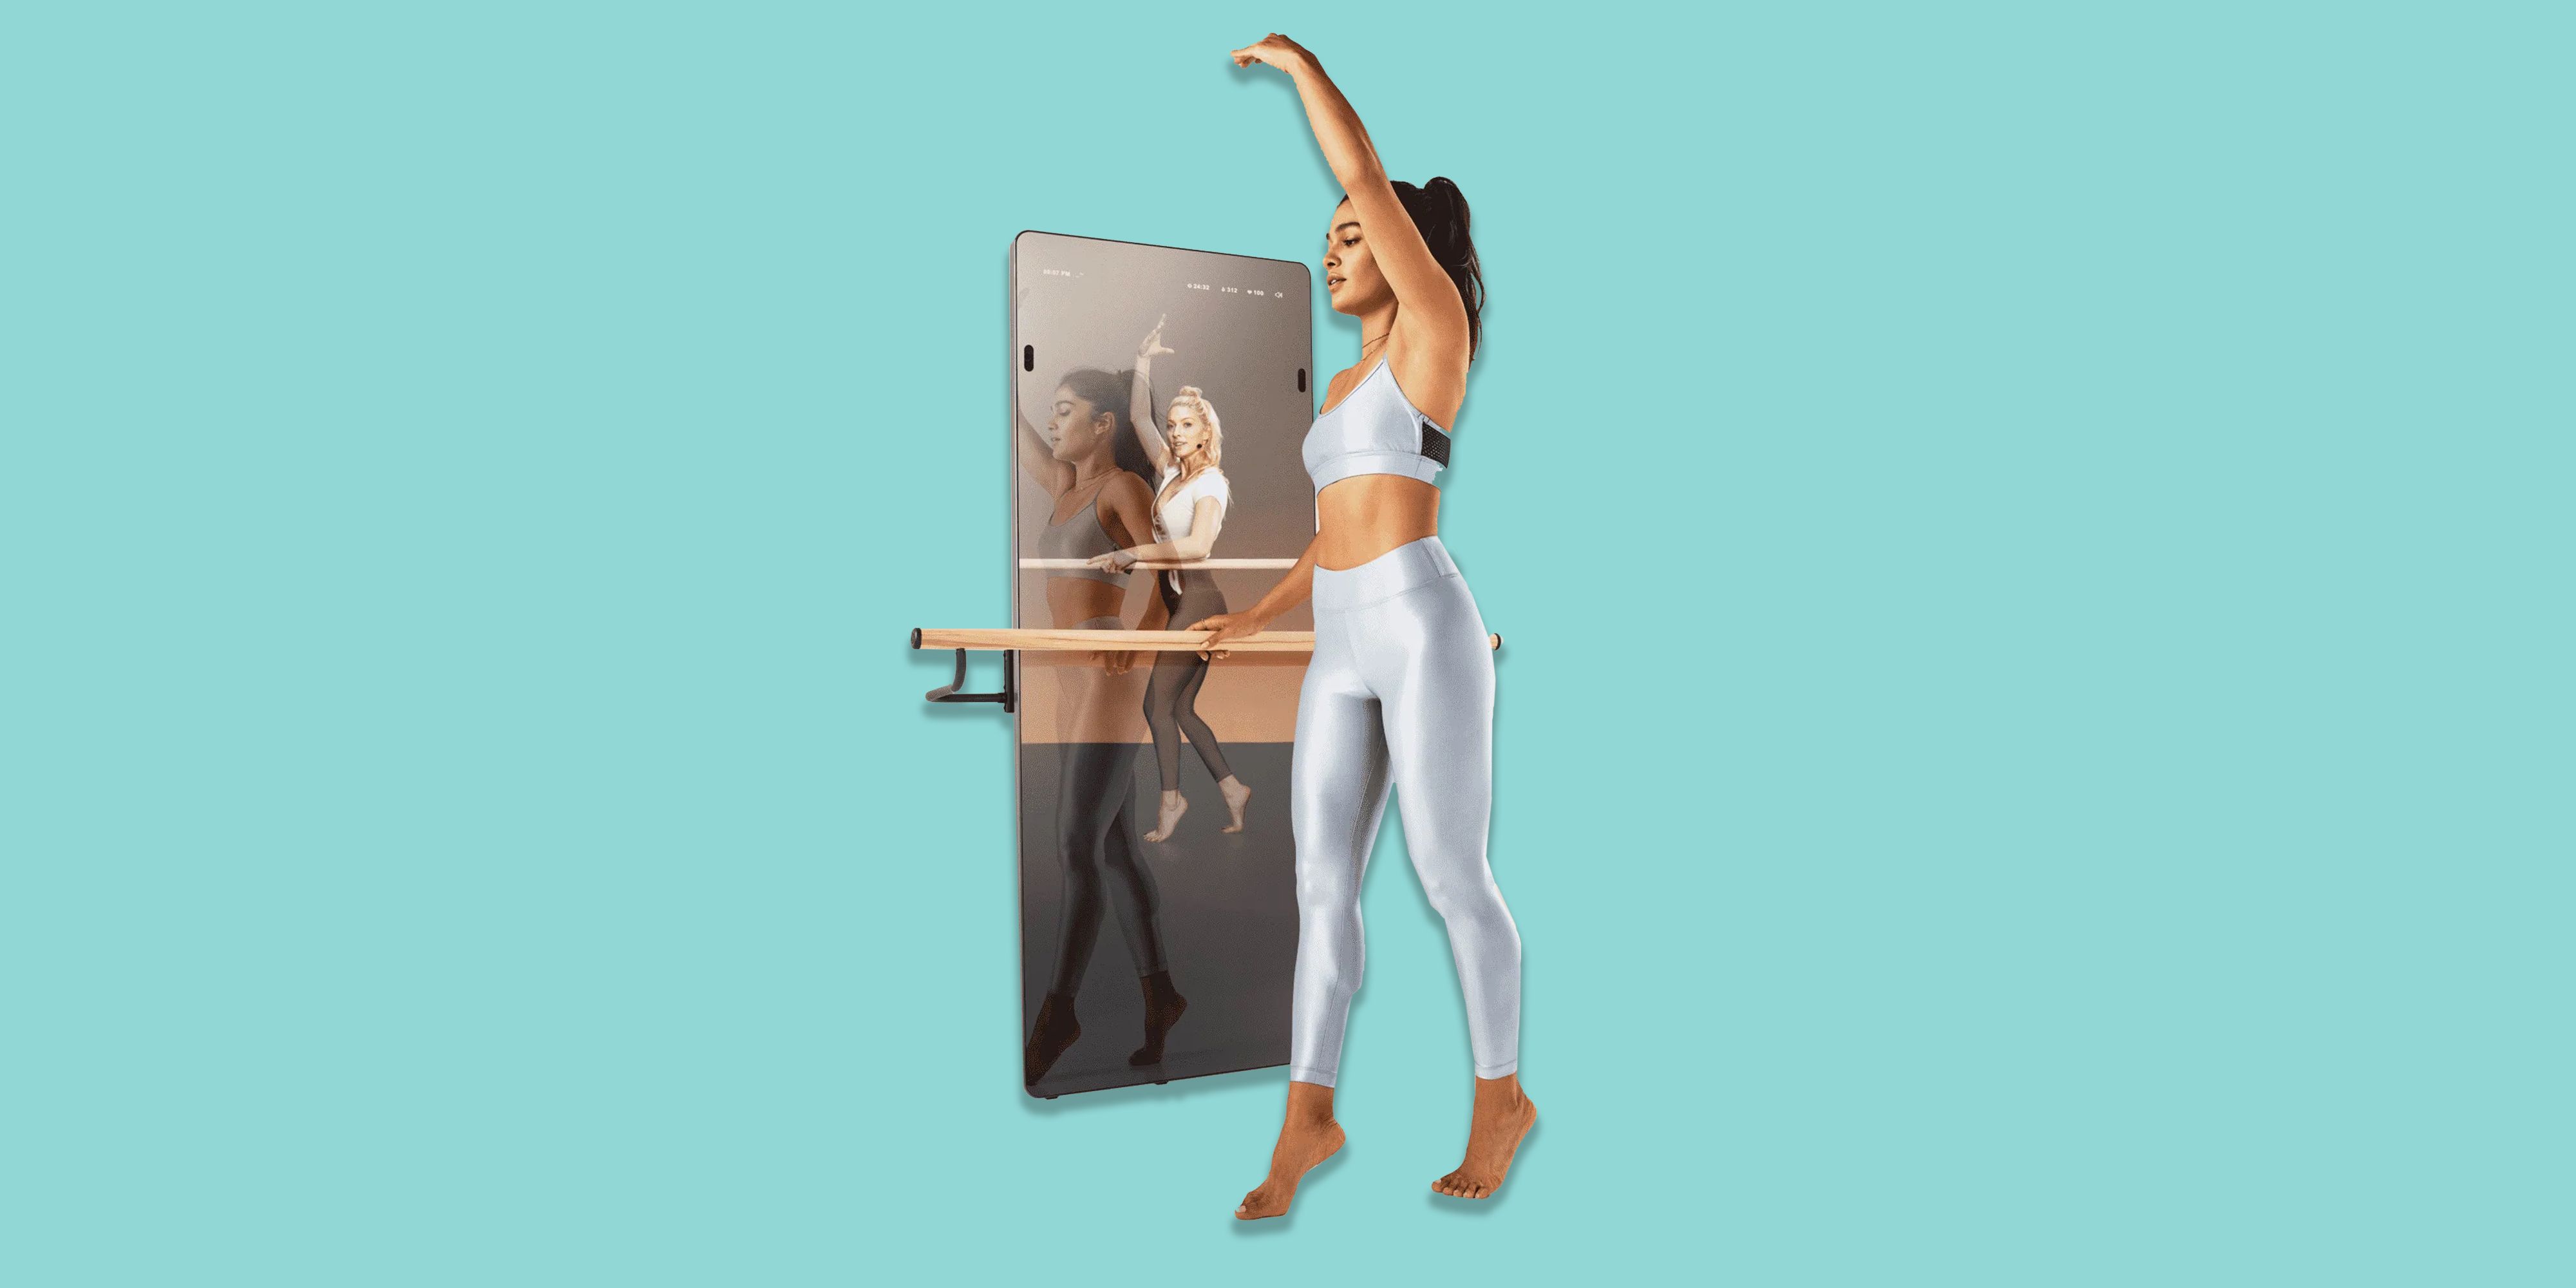 Baidu launches a Smart Fitness Mirror with a 43-inch IPS screen